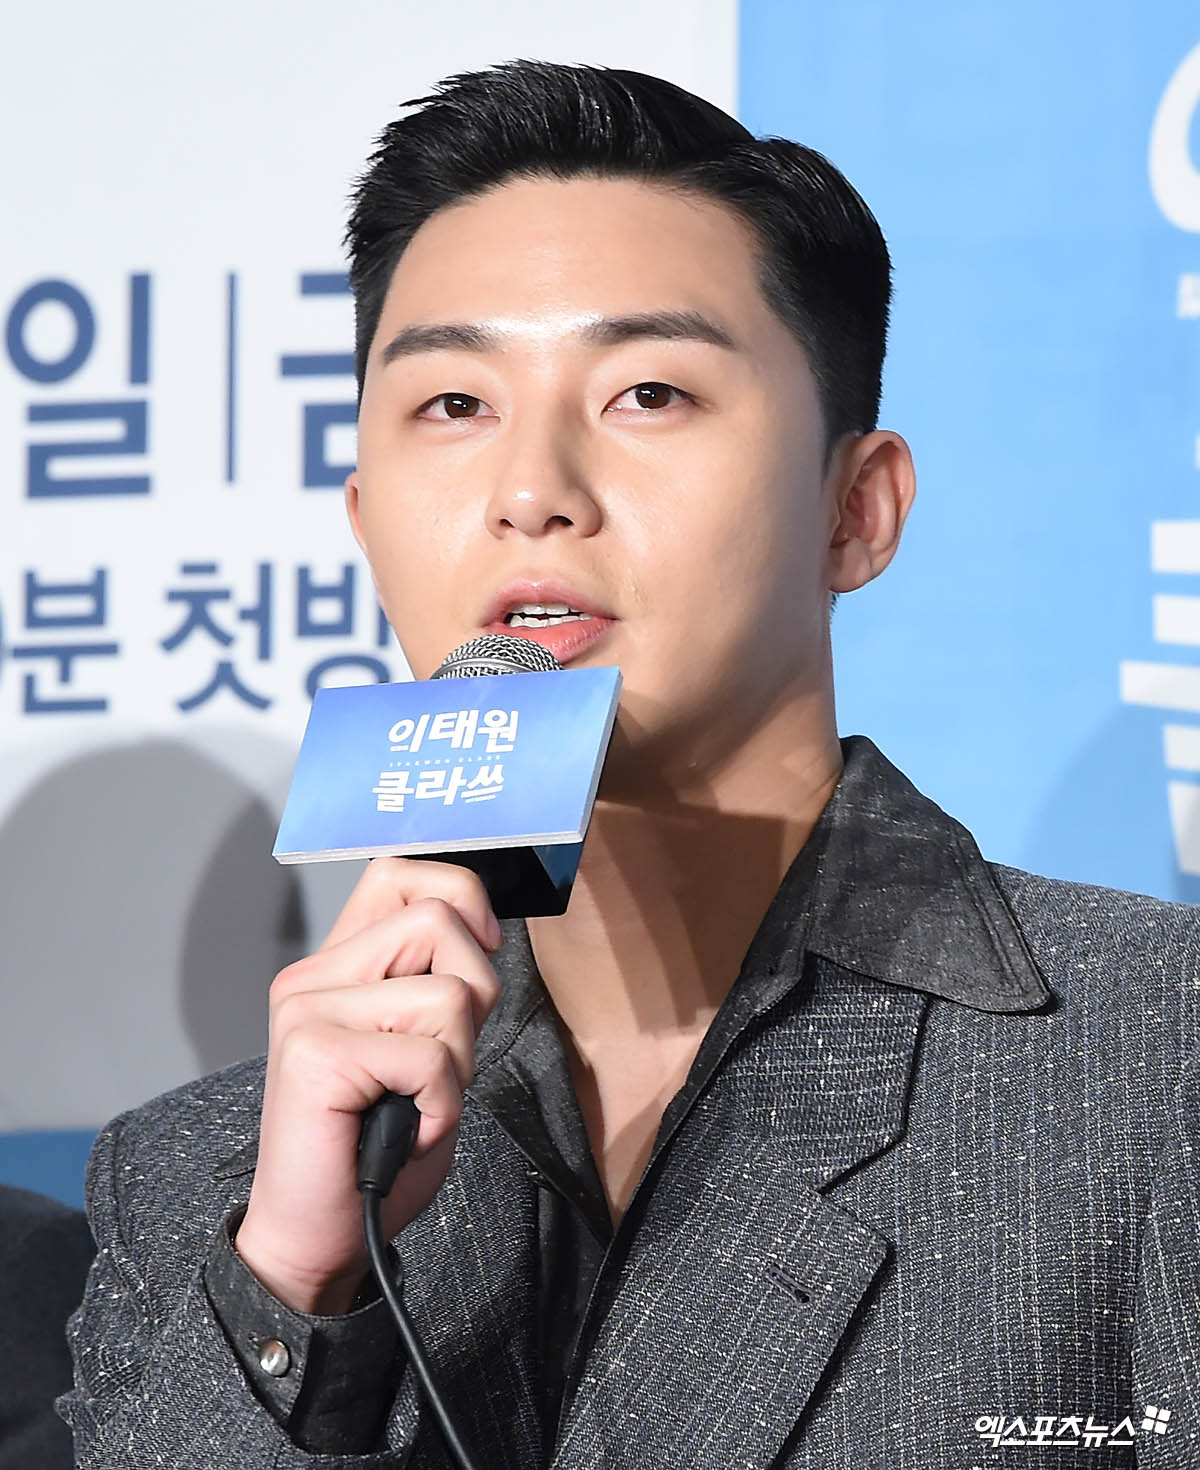 Actor Park Seo-joon, who attended the JTBC gilt drama Itaewon Klath production presentation held in Conrad Seoul, Yeouido-dong, Seoul, on the afternoon of the 20th, is giving a greeting.